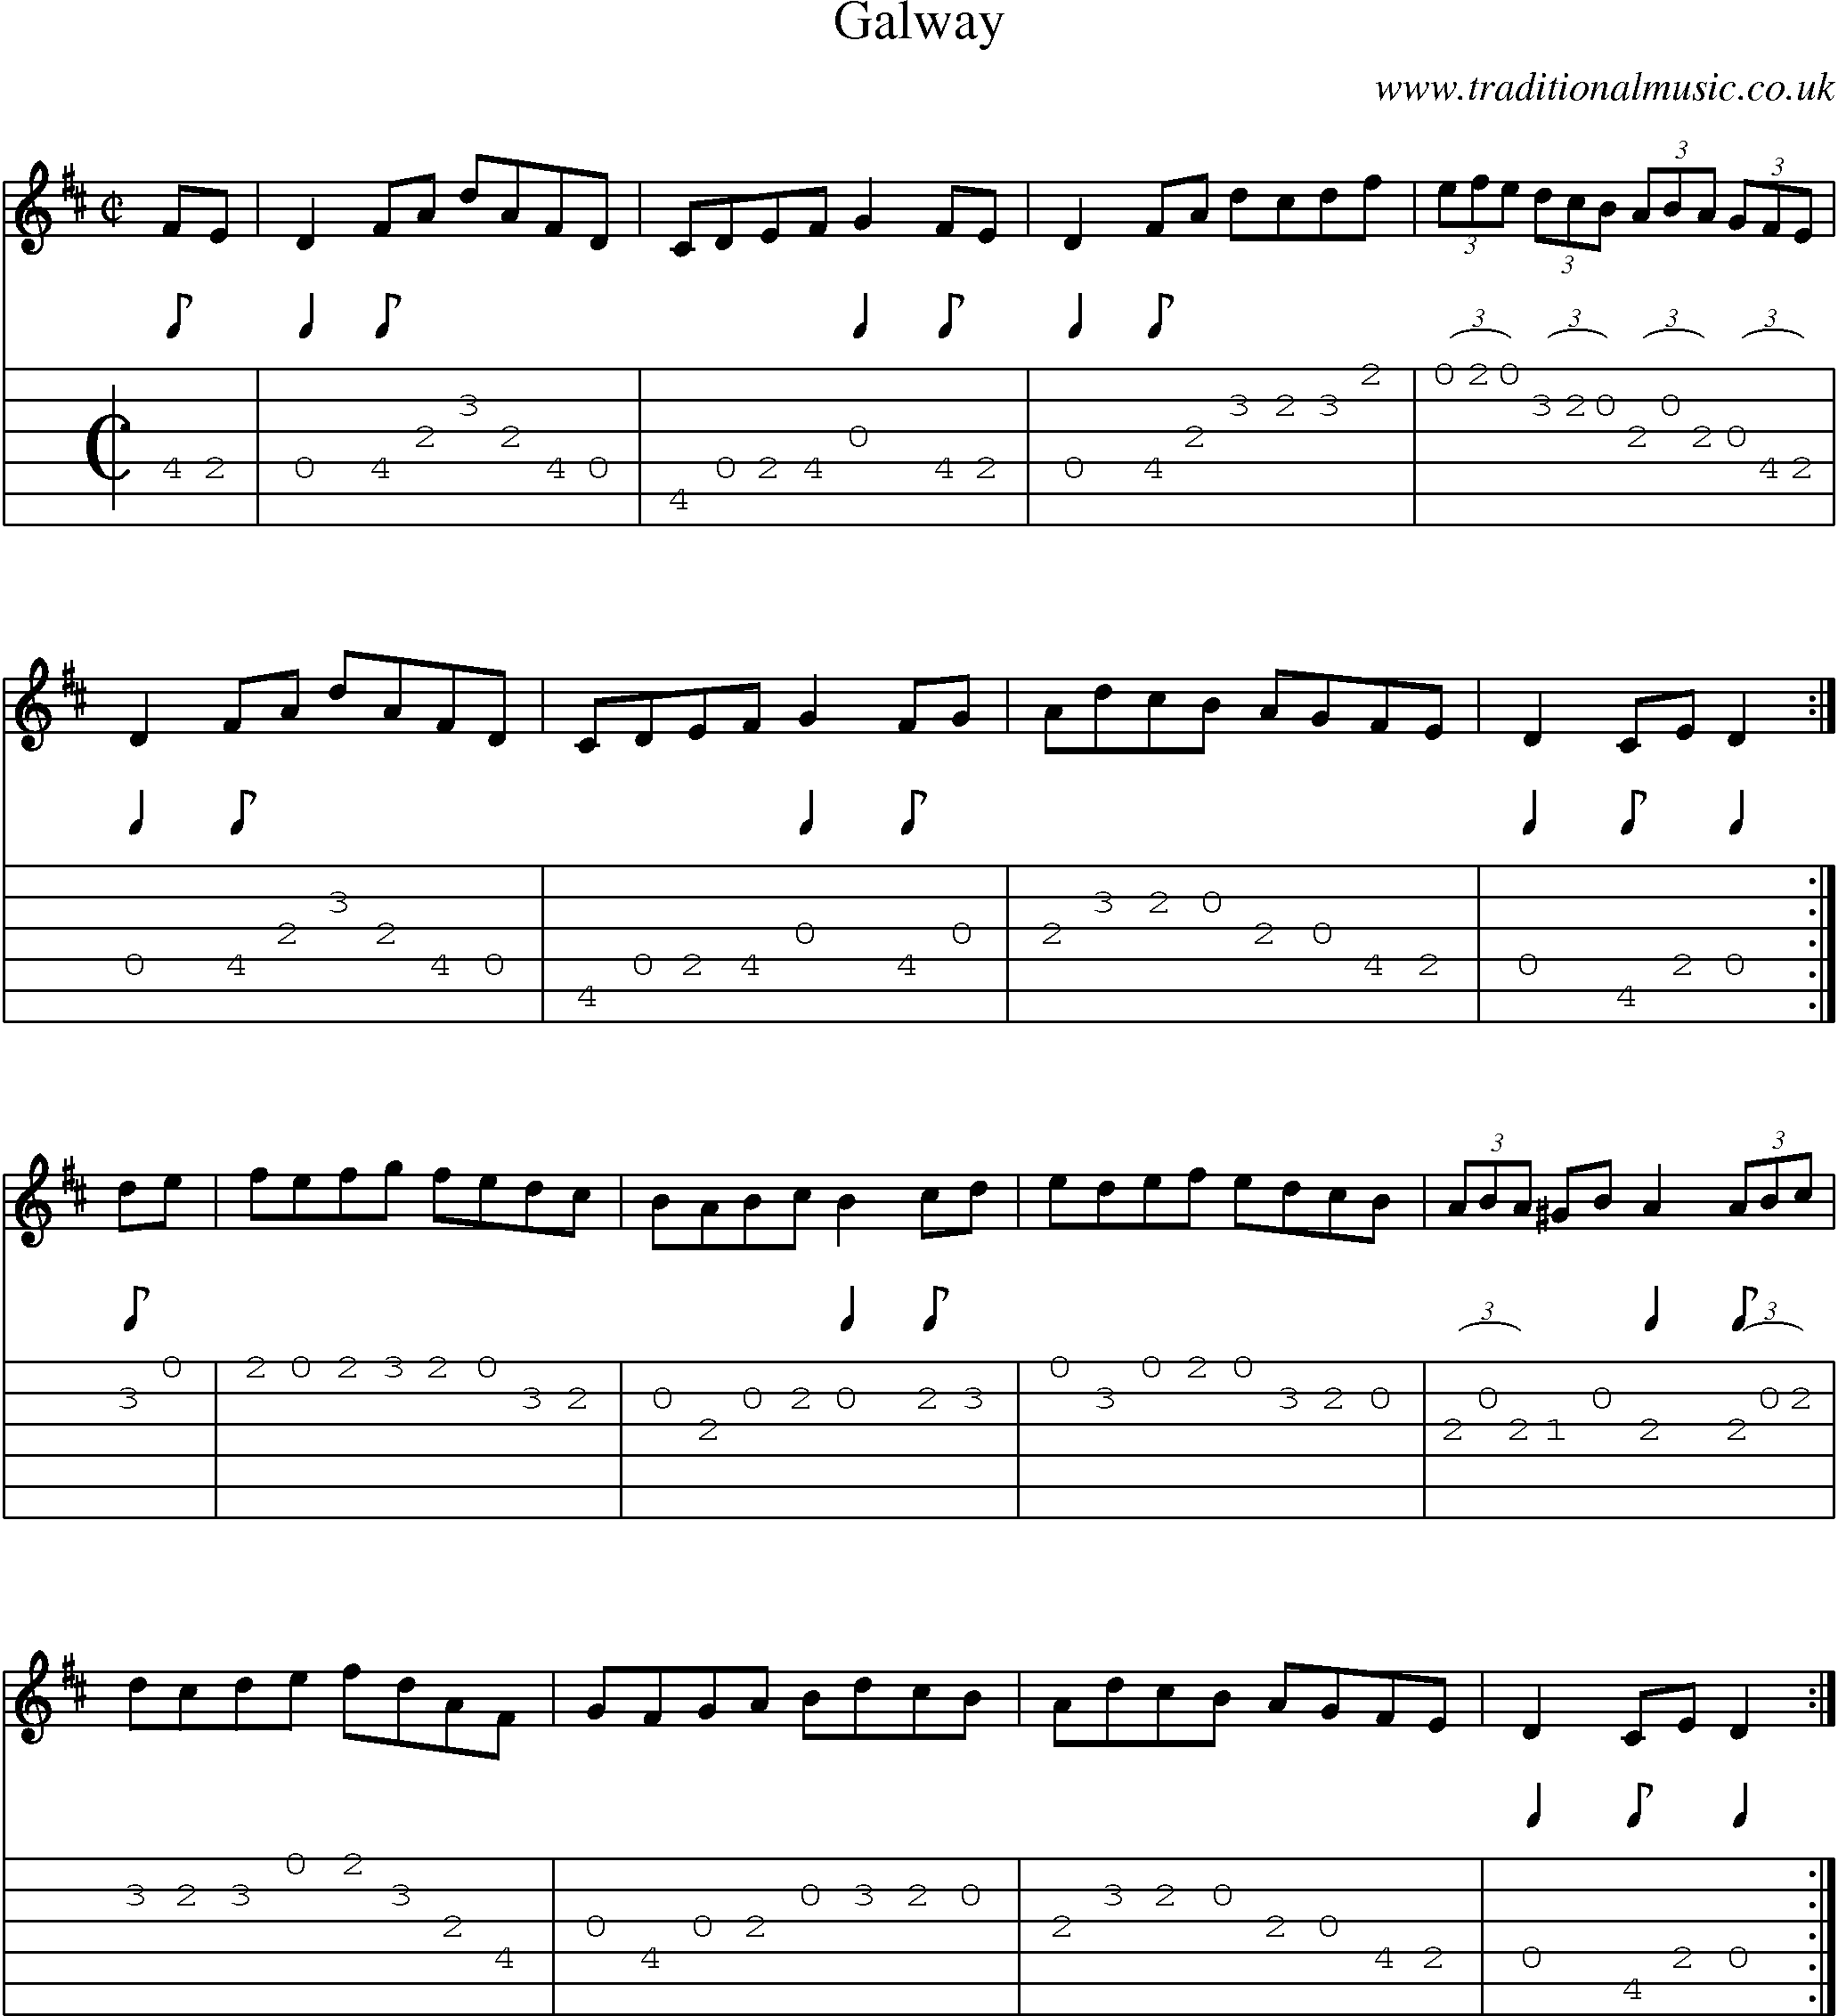 Music Score and Guitar Tabs for Galway